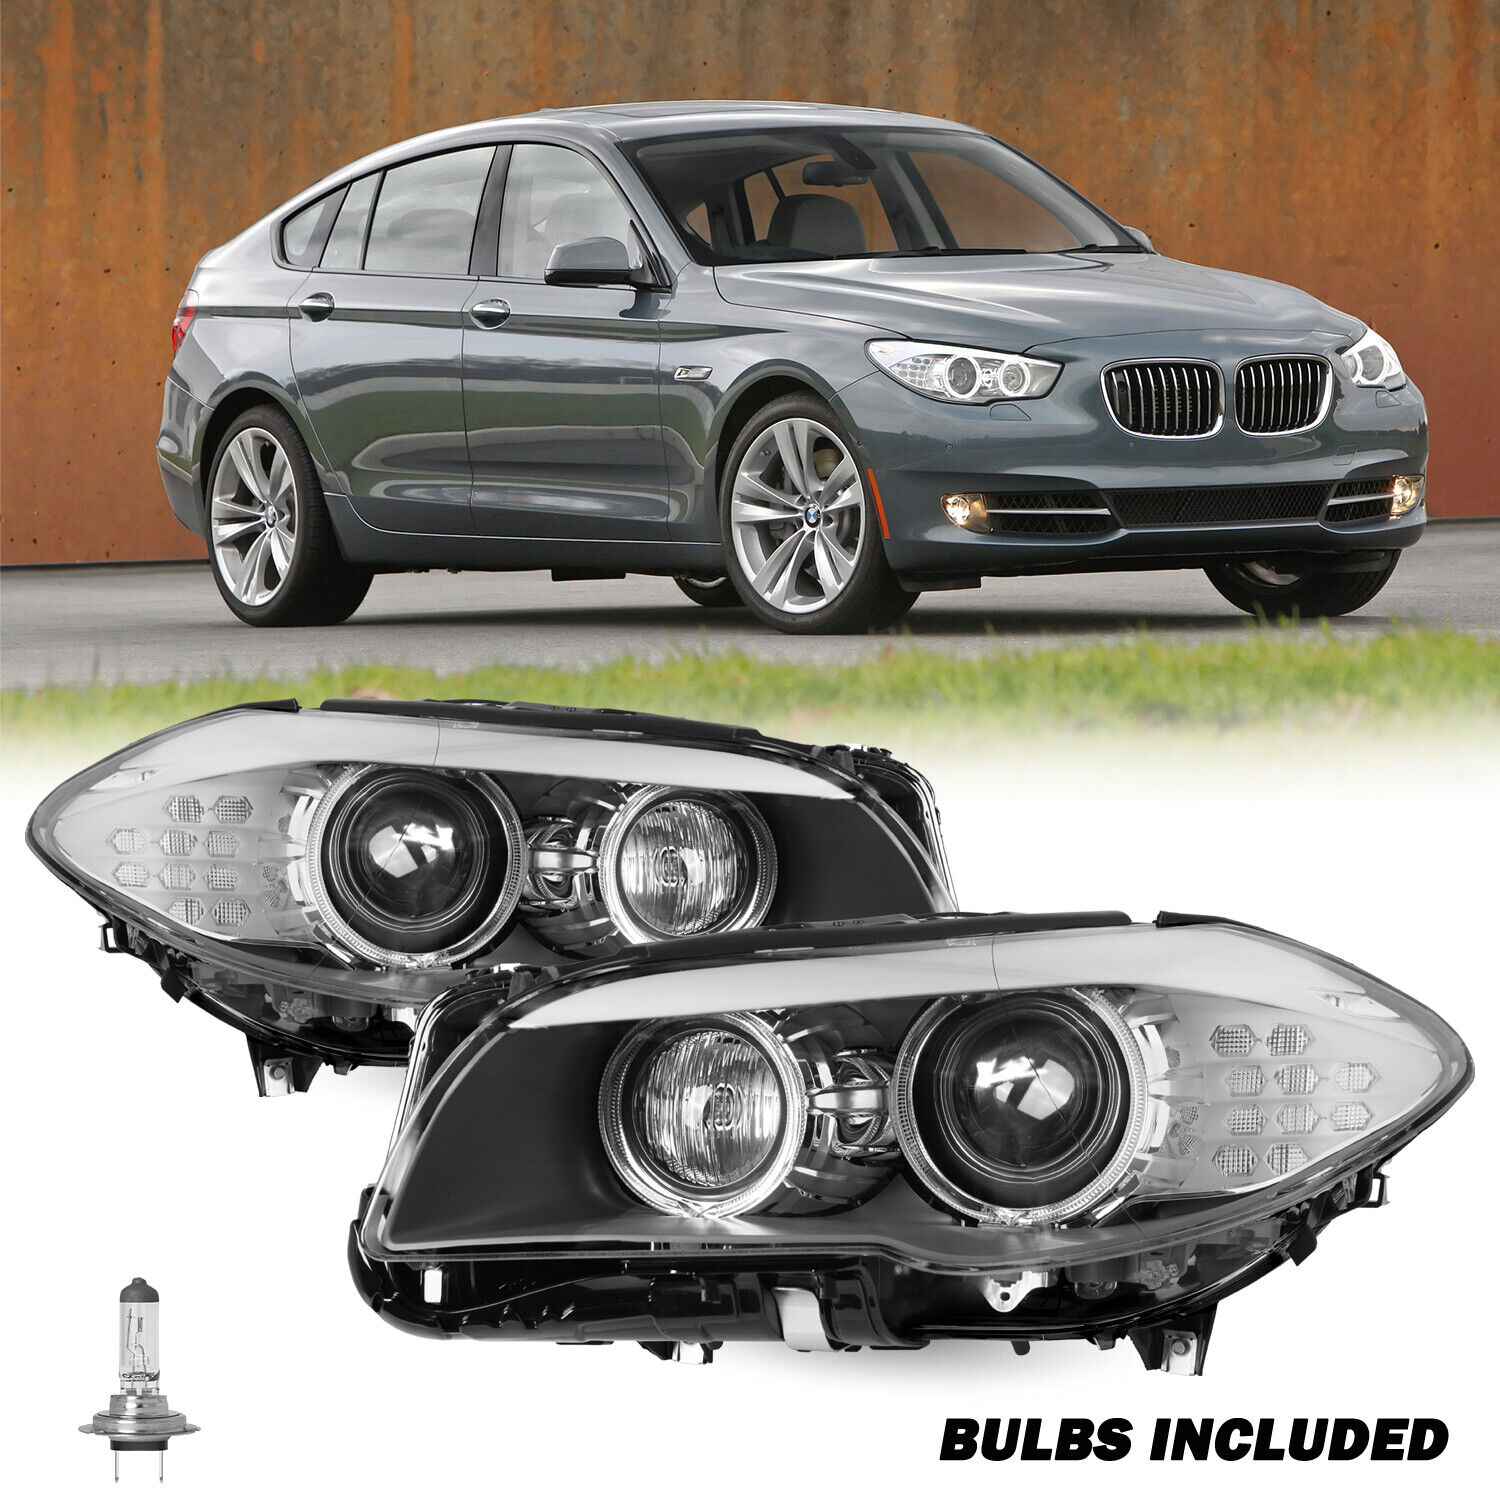 For 2009-2013 BMW 5 Series F10 Hid Headlight w/ AFS Left+Right Sides Headlamps